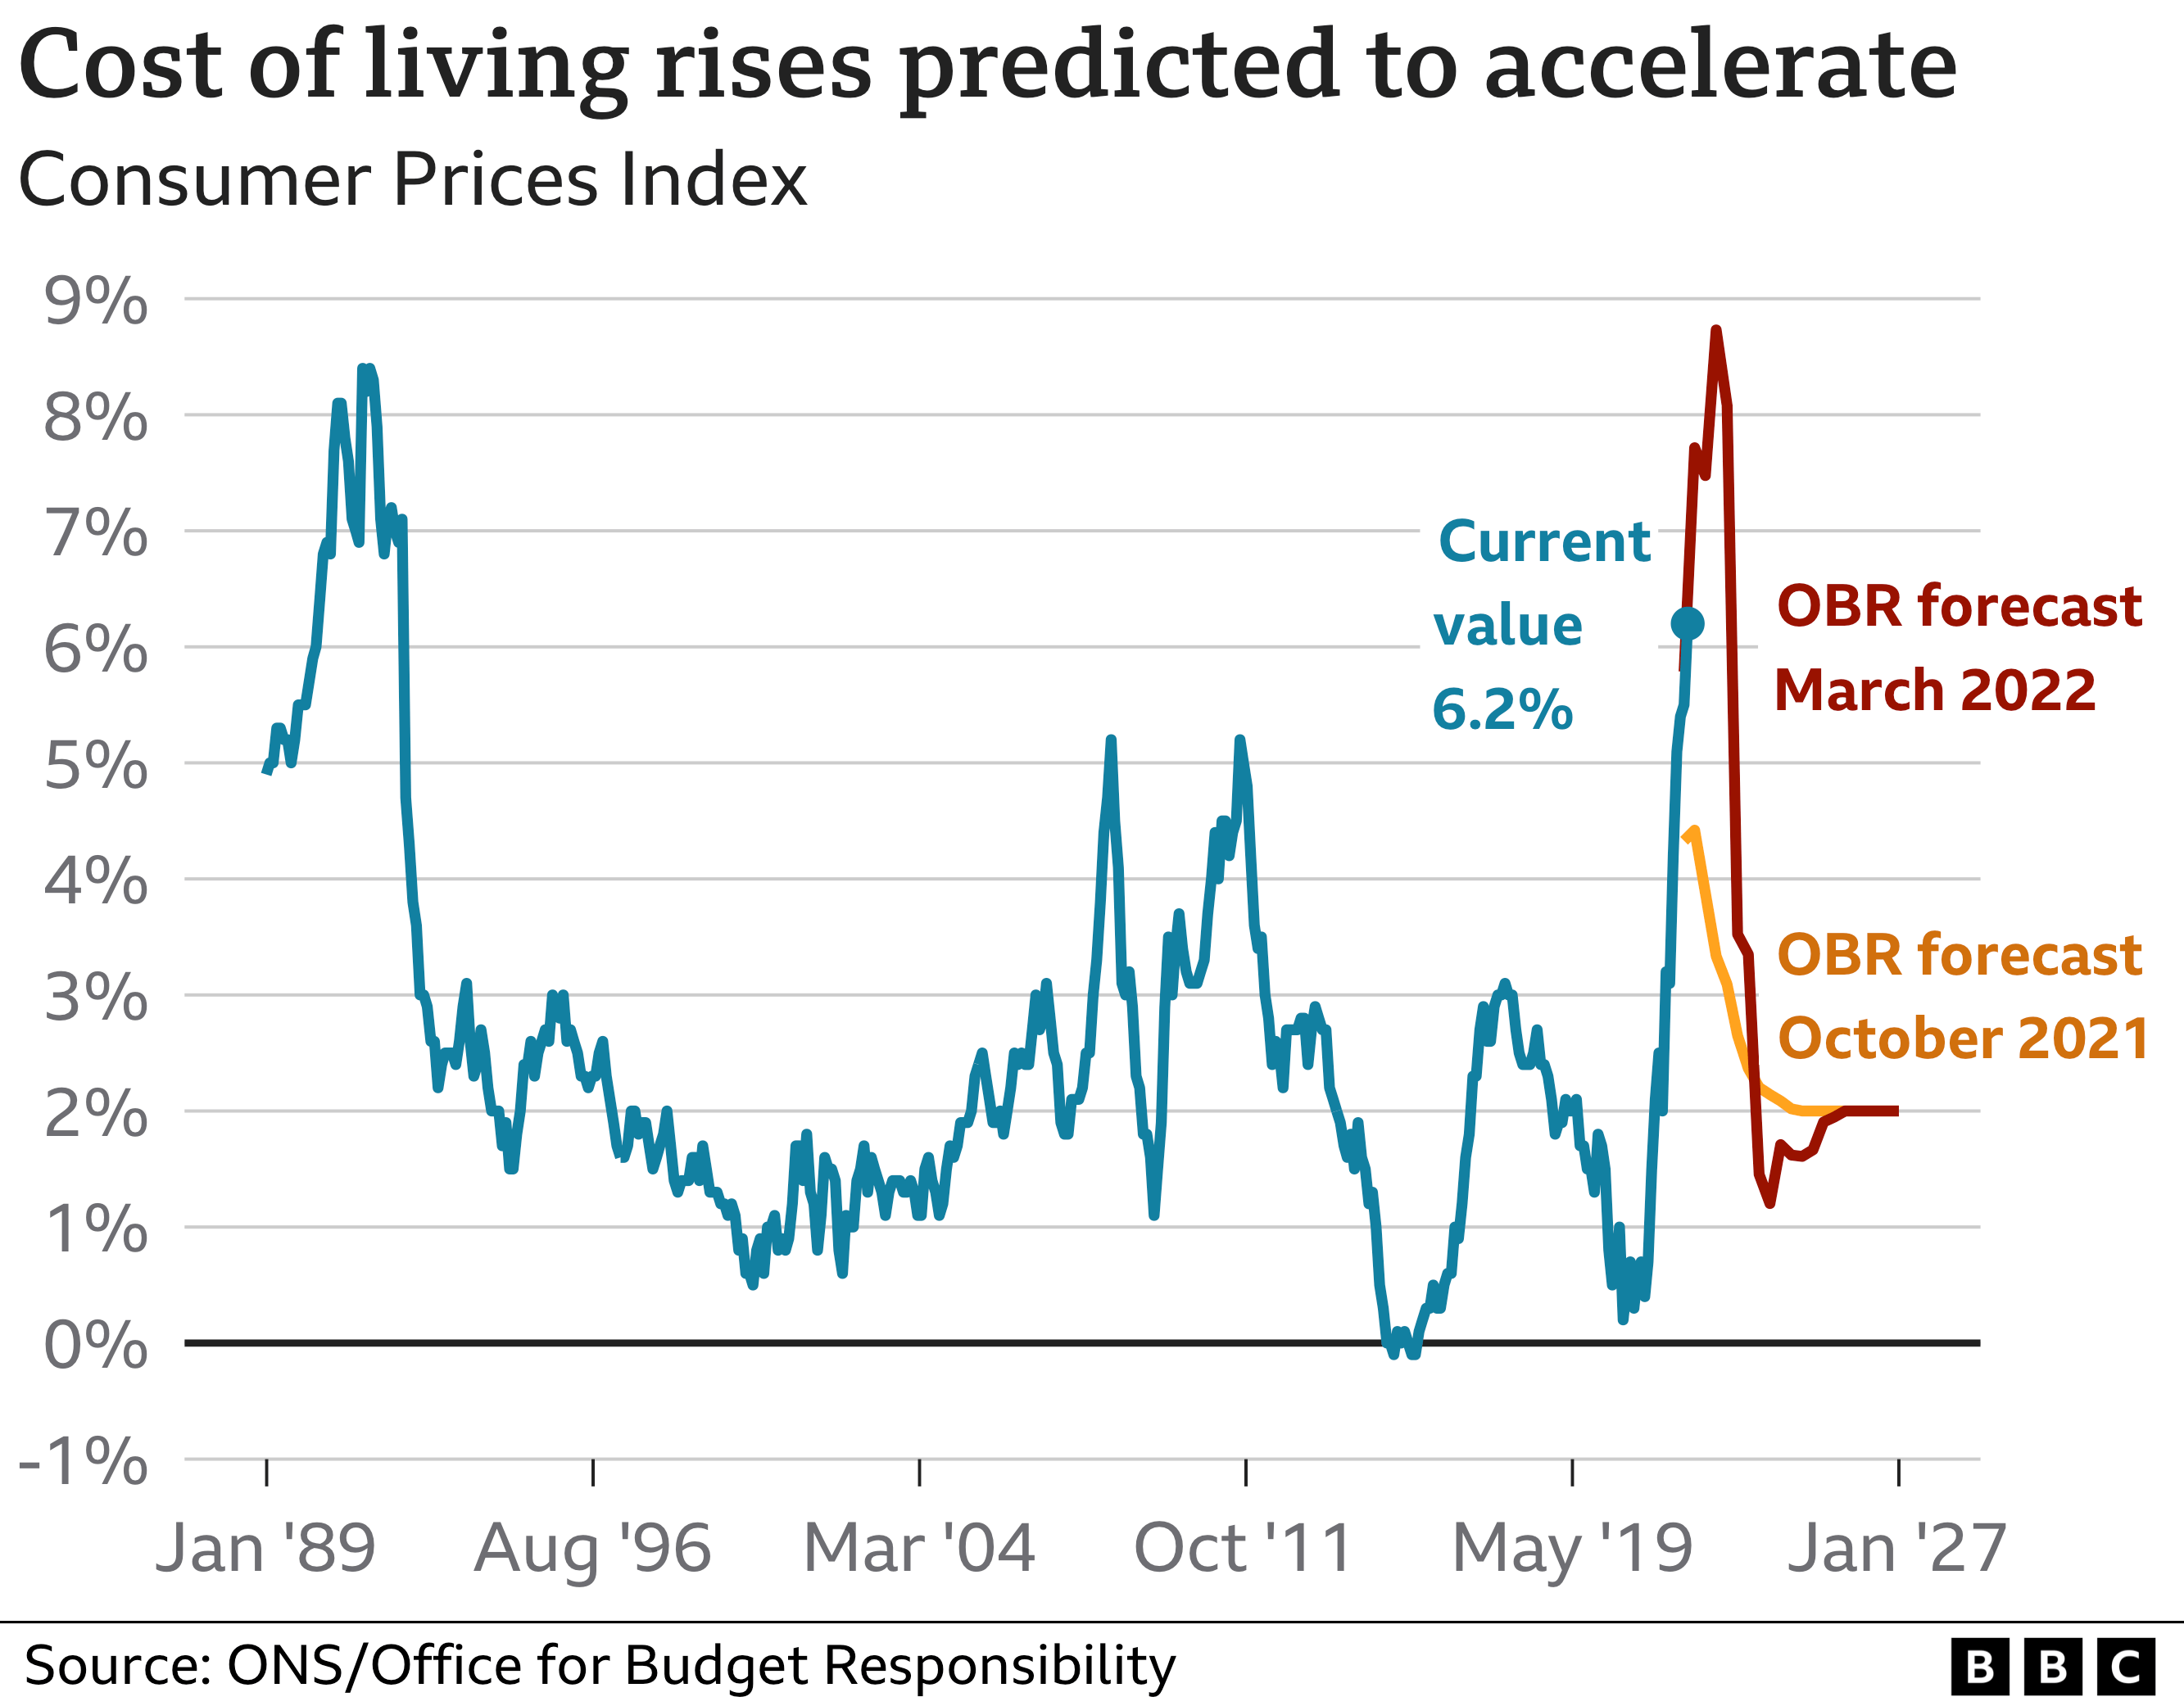 Cost of living rises predicted to accelerate - chart